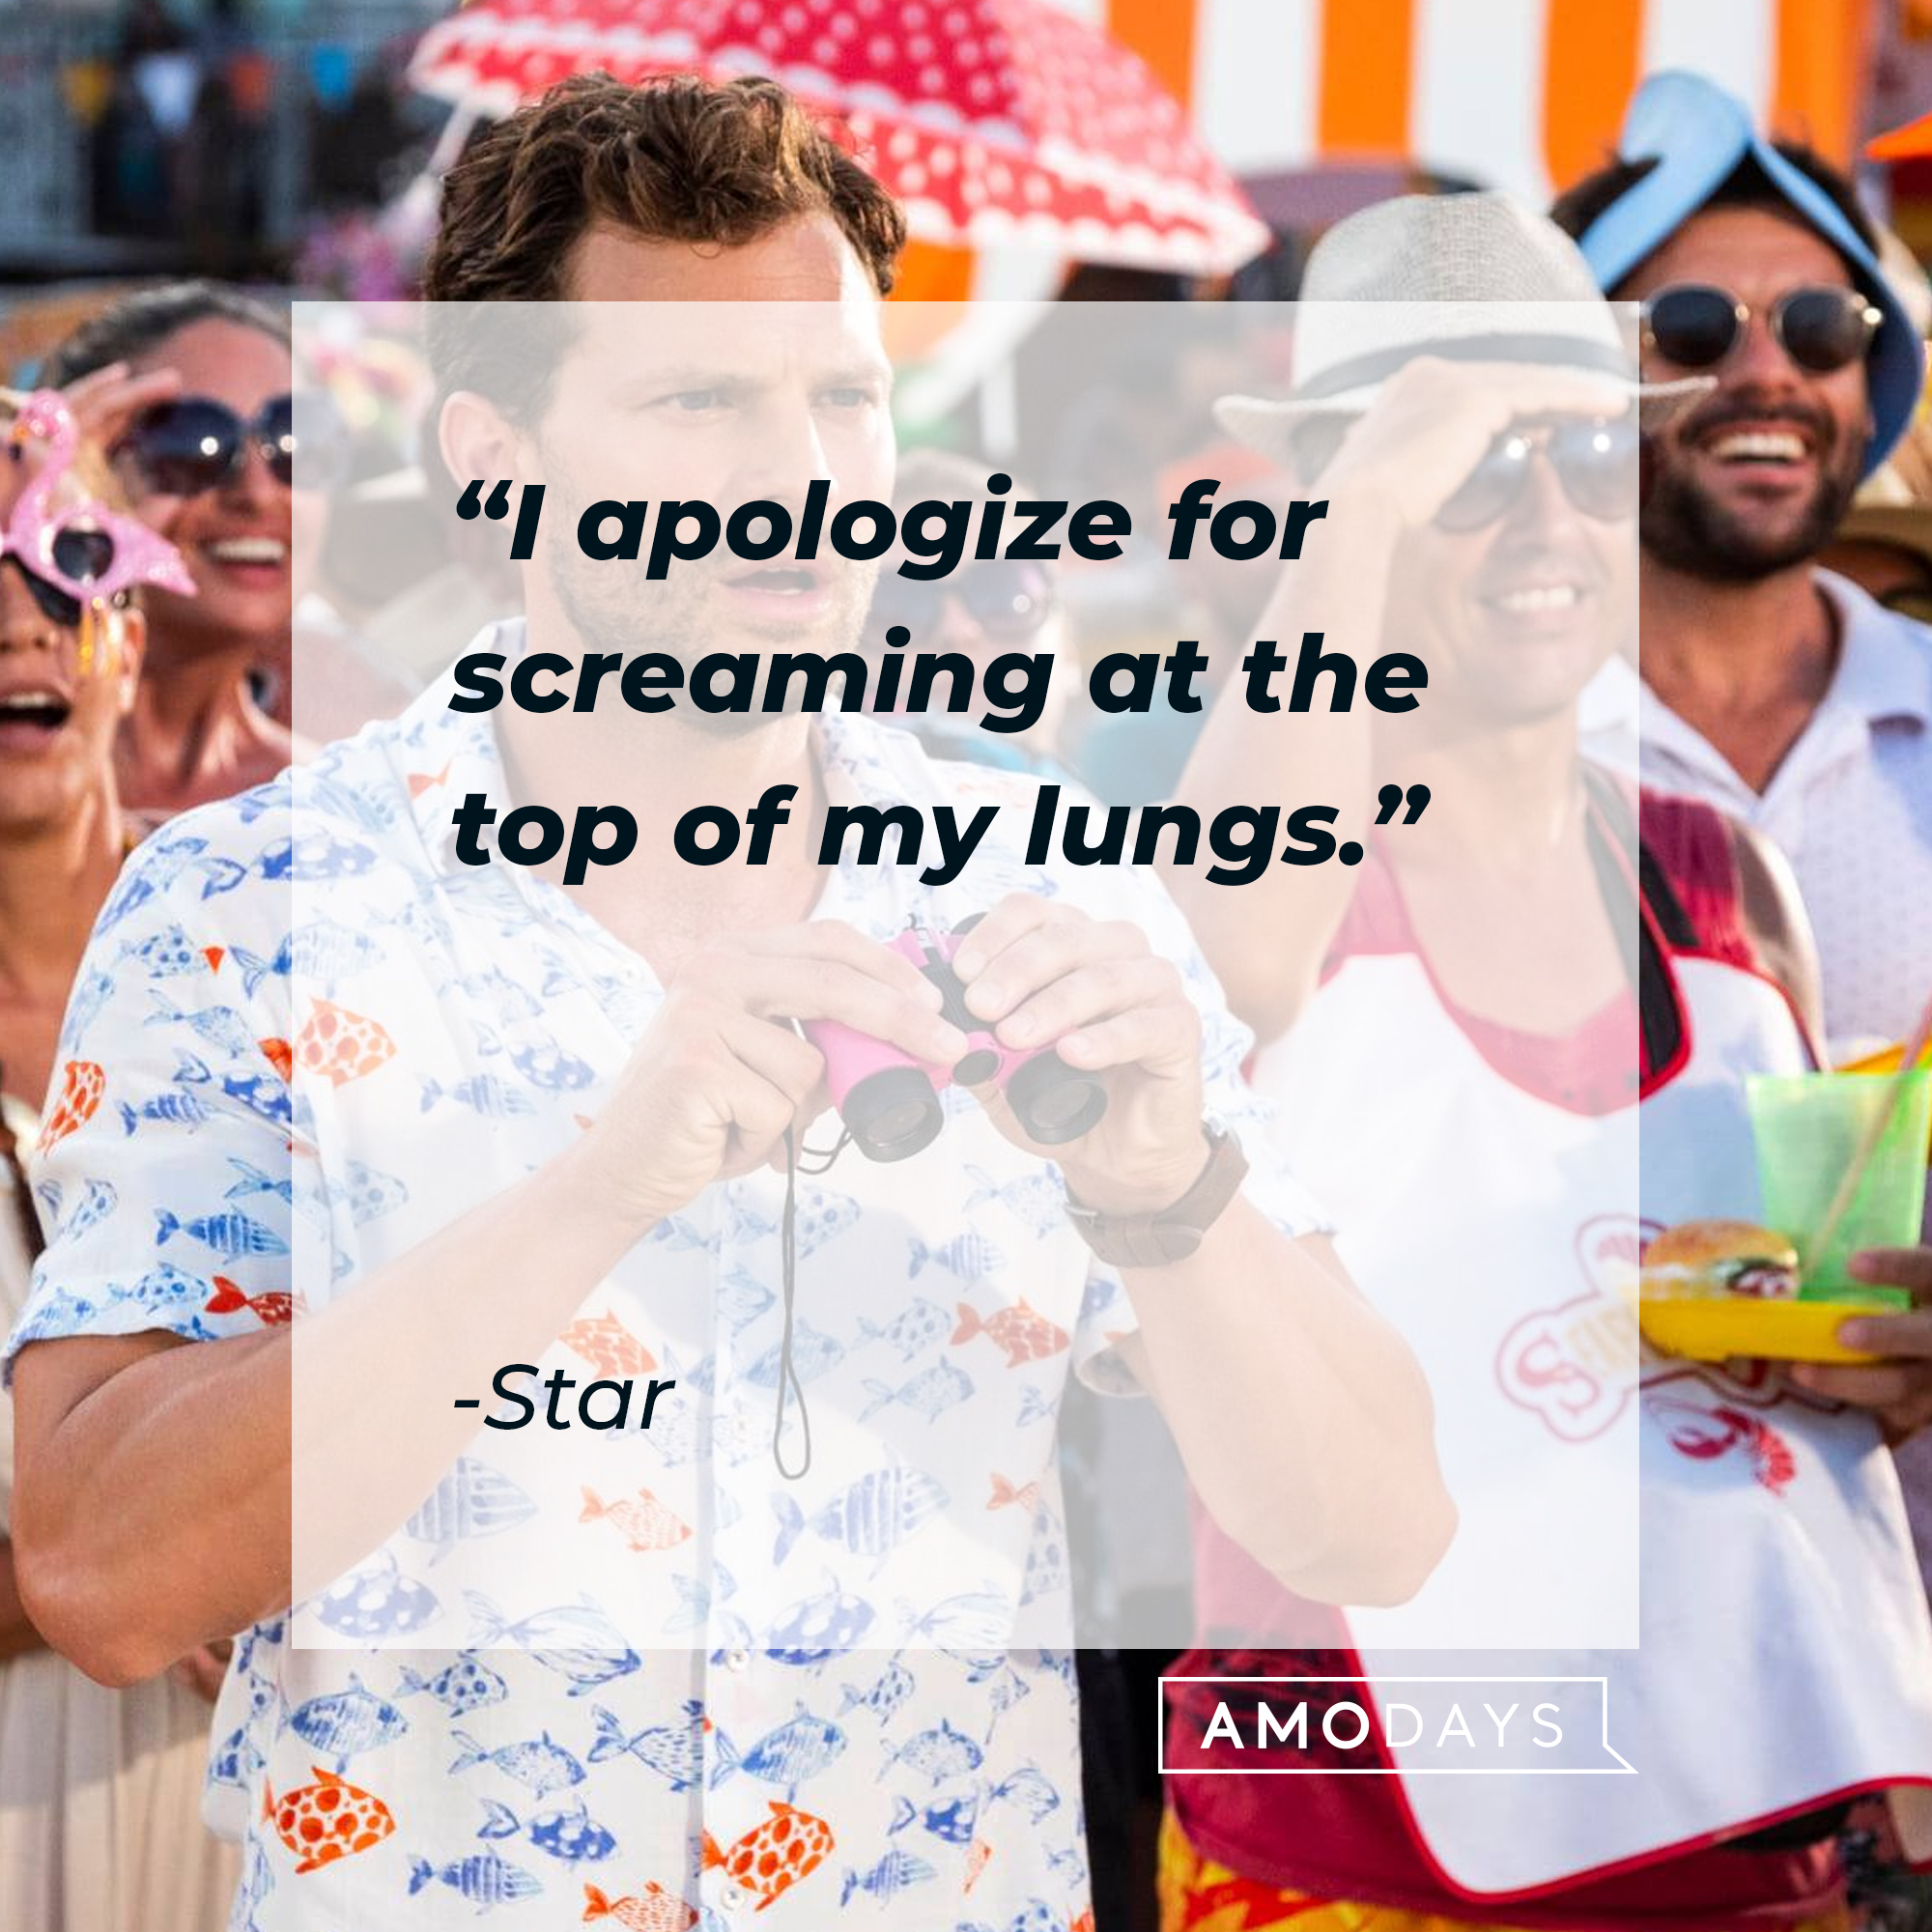 Star's quote: "I apologize for screaming at the top of my lungs." | Source: facebook.com/BarbAndStar